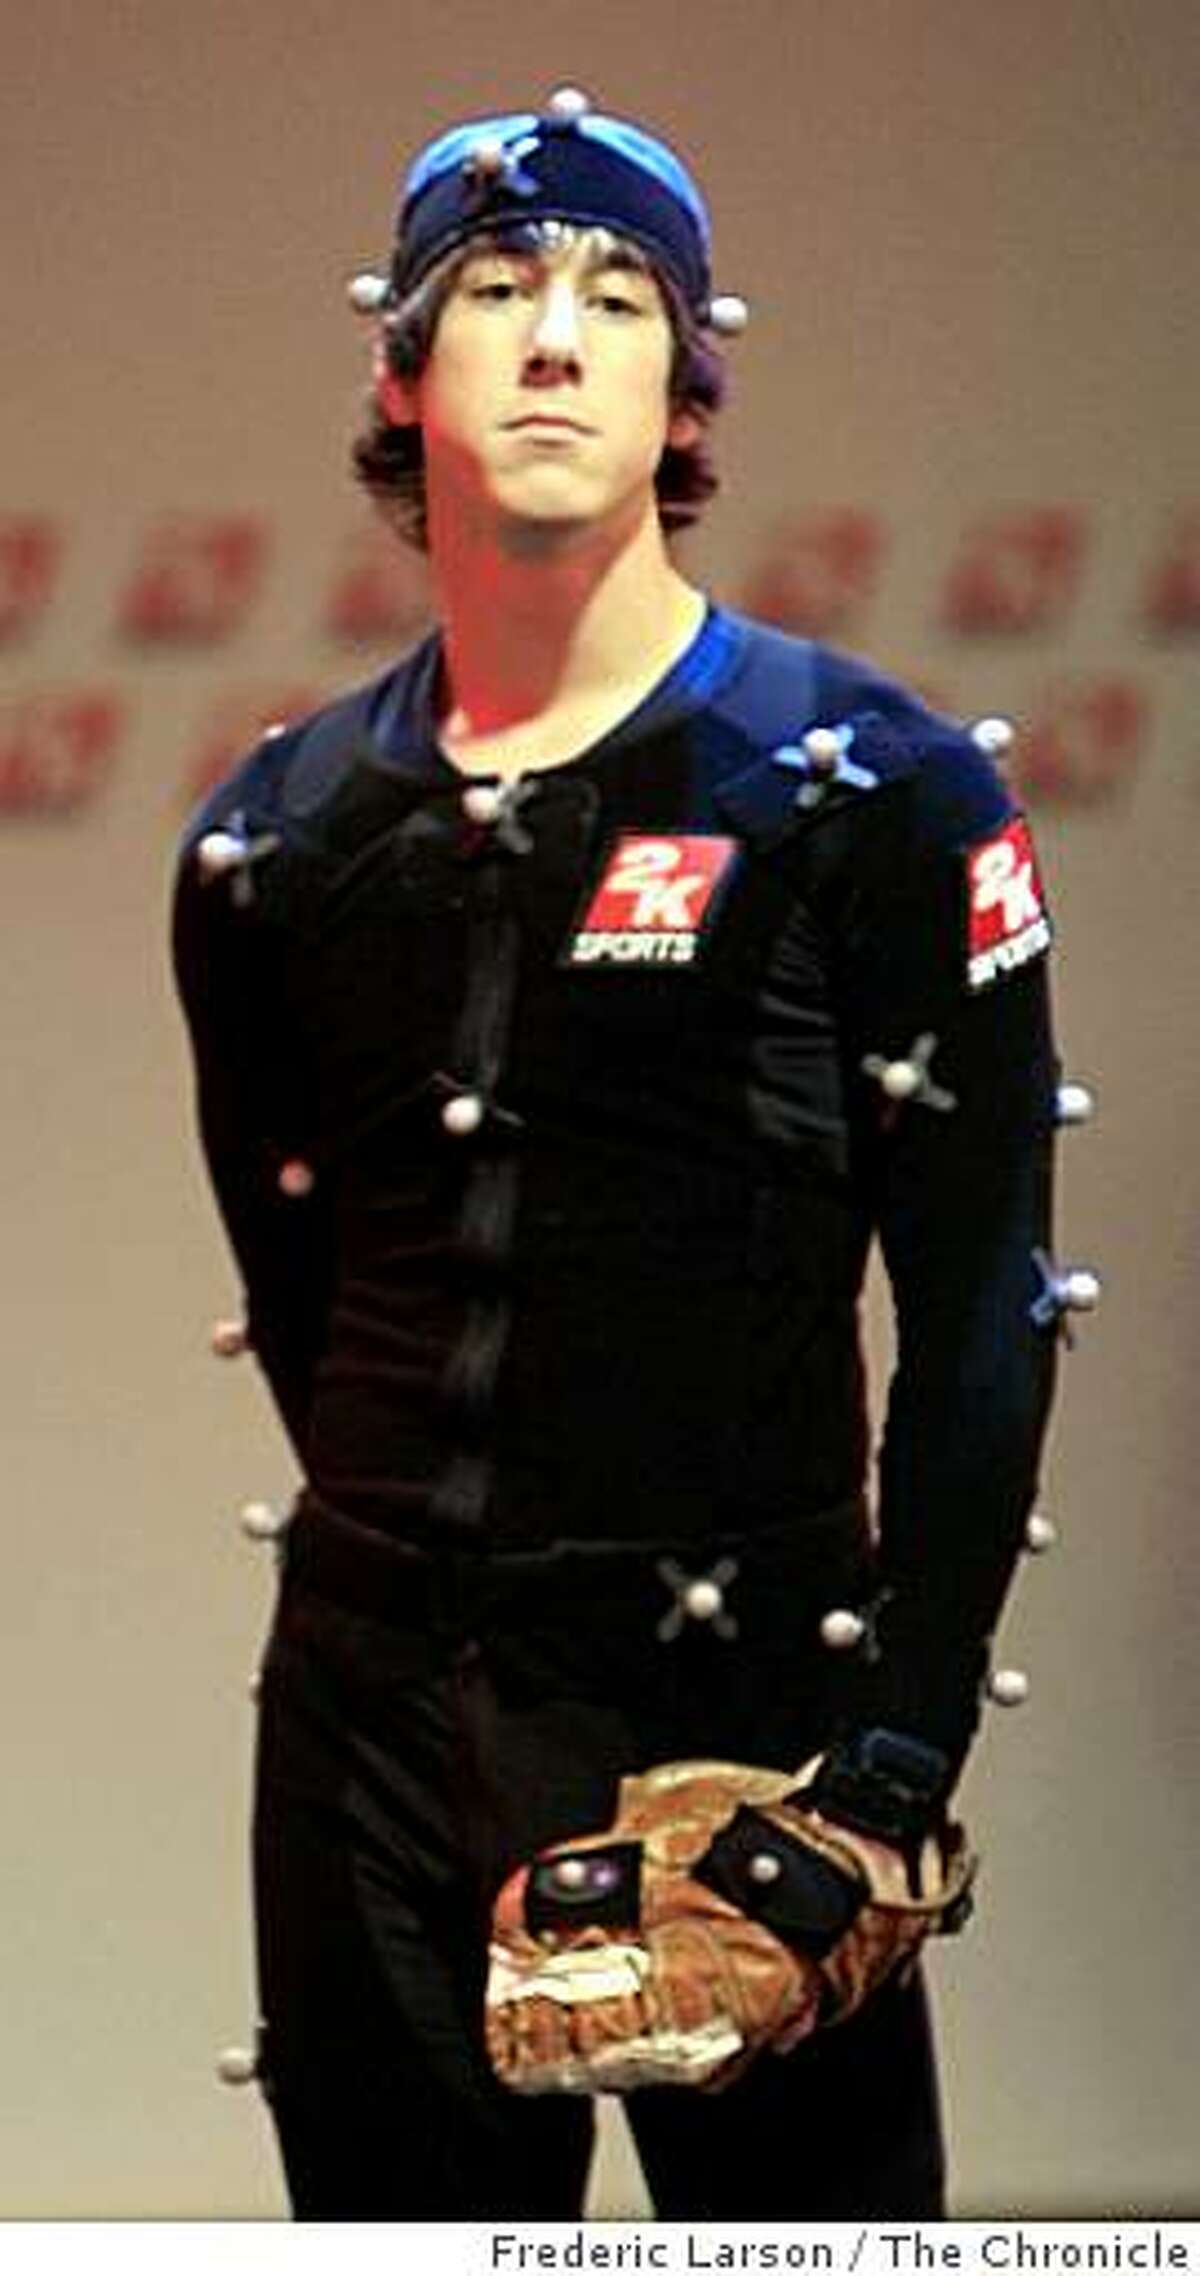 Tim Lincecum the Cy Young award winner and San Francisco Giants pitcher participated in a motion capture session with 2K Sports for an upcoming video game in Novato Calif., on December 3, 2008.